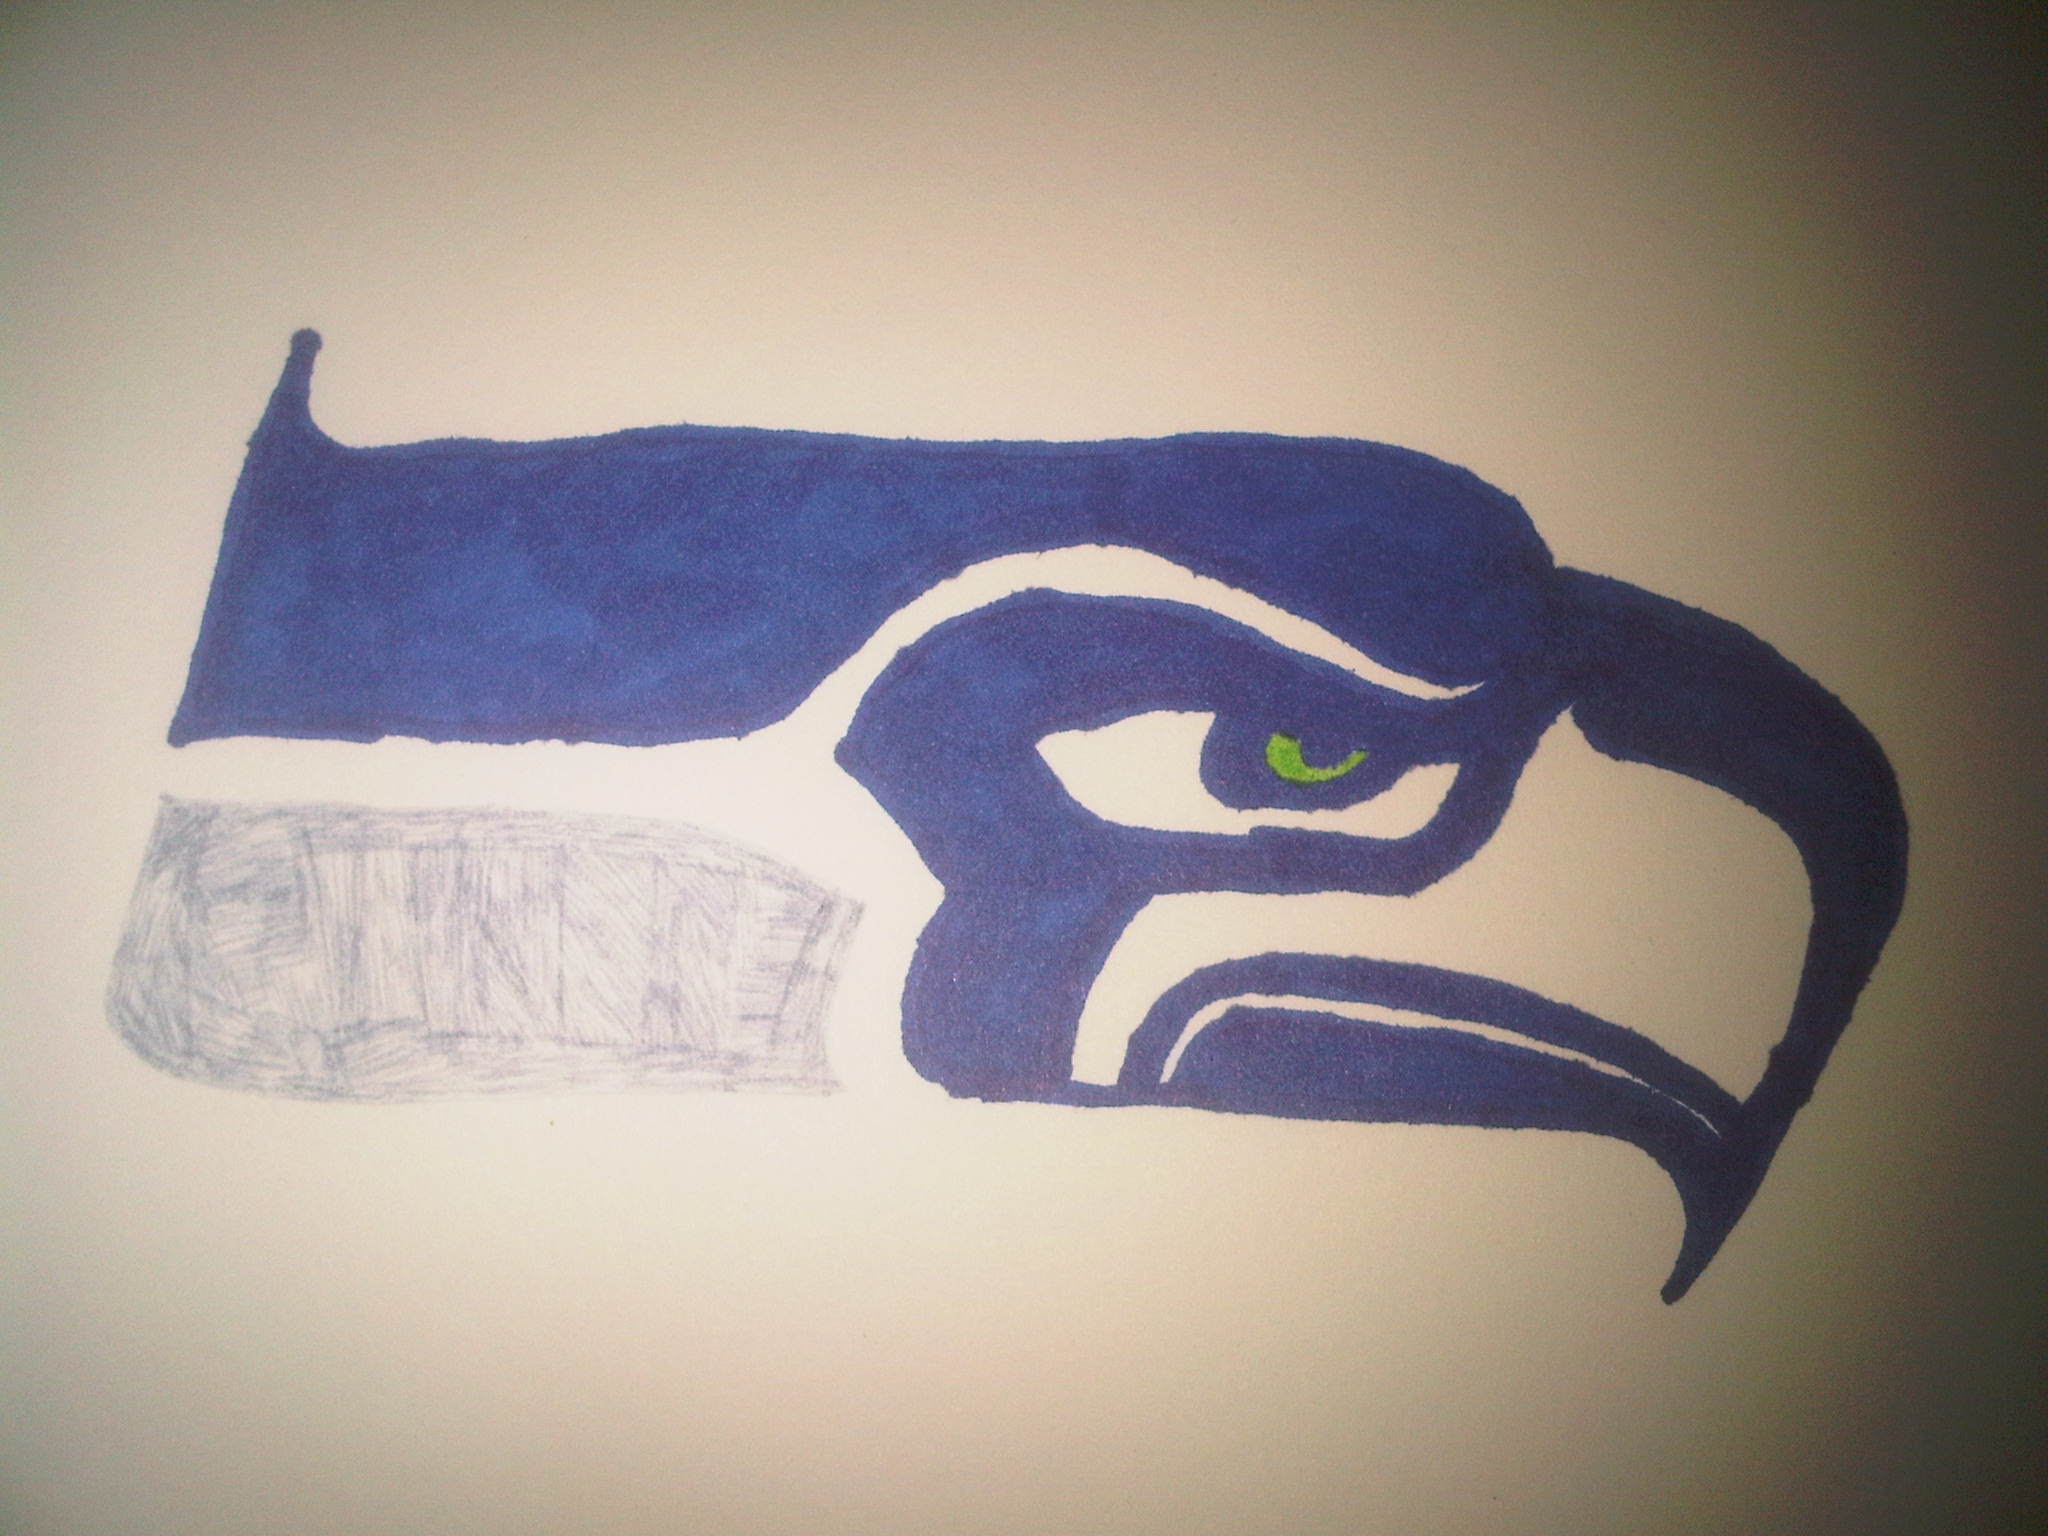 How to Draw the Seattle Seahawks logo - YouTube